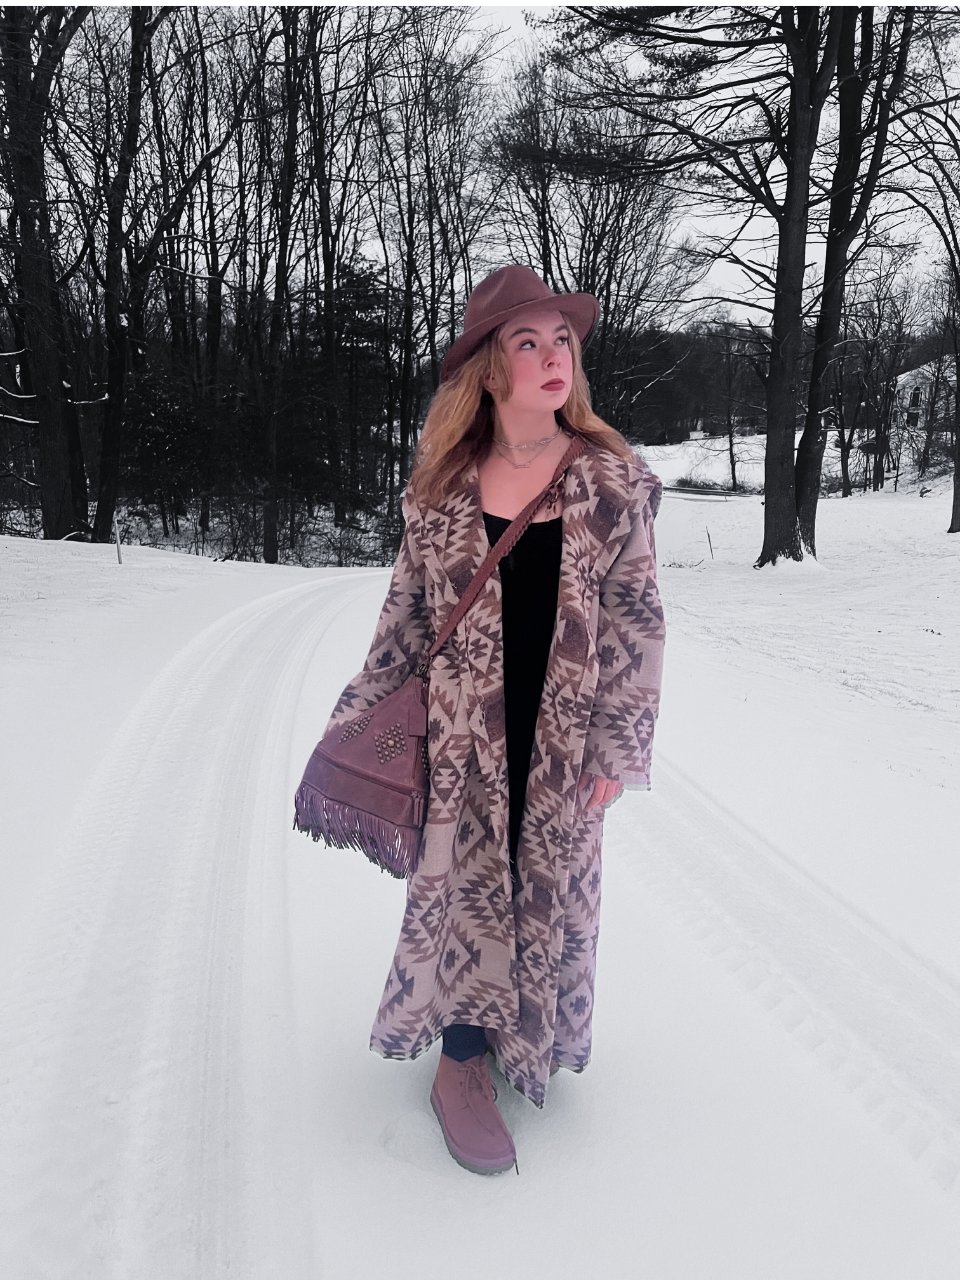 SANDS OF TRANQUILITY: Pattern Long Coat with Hood in Tan, Brown, and Beige